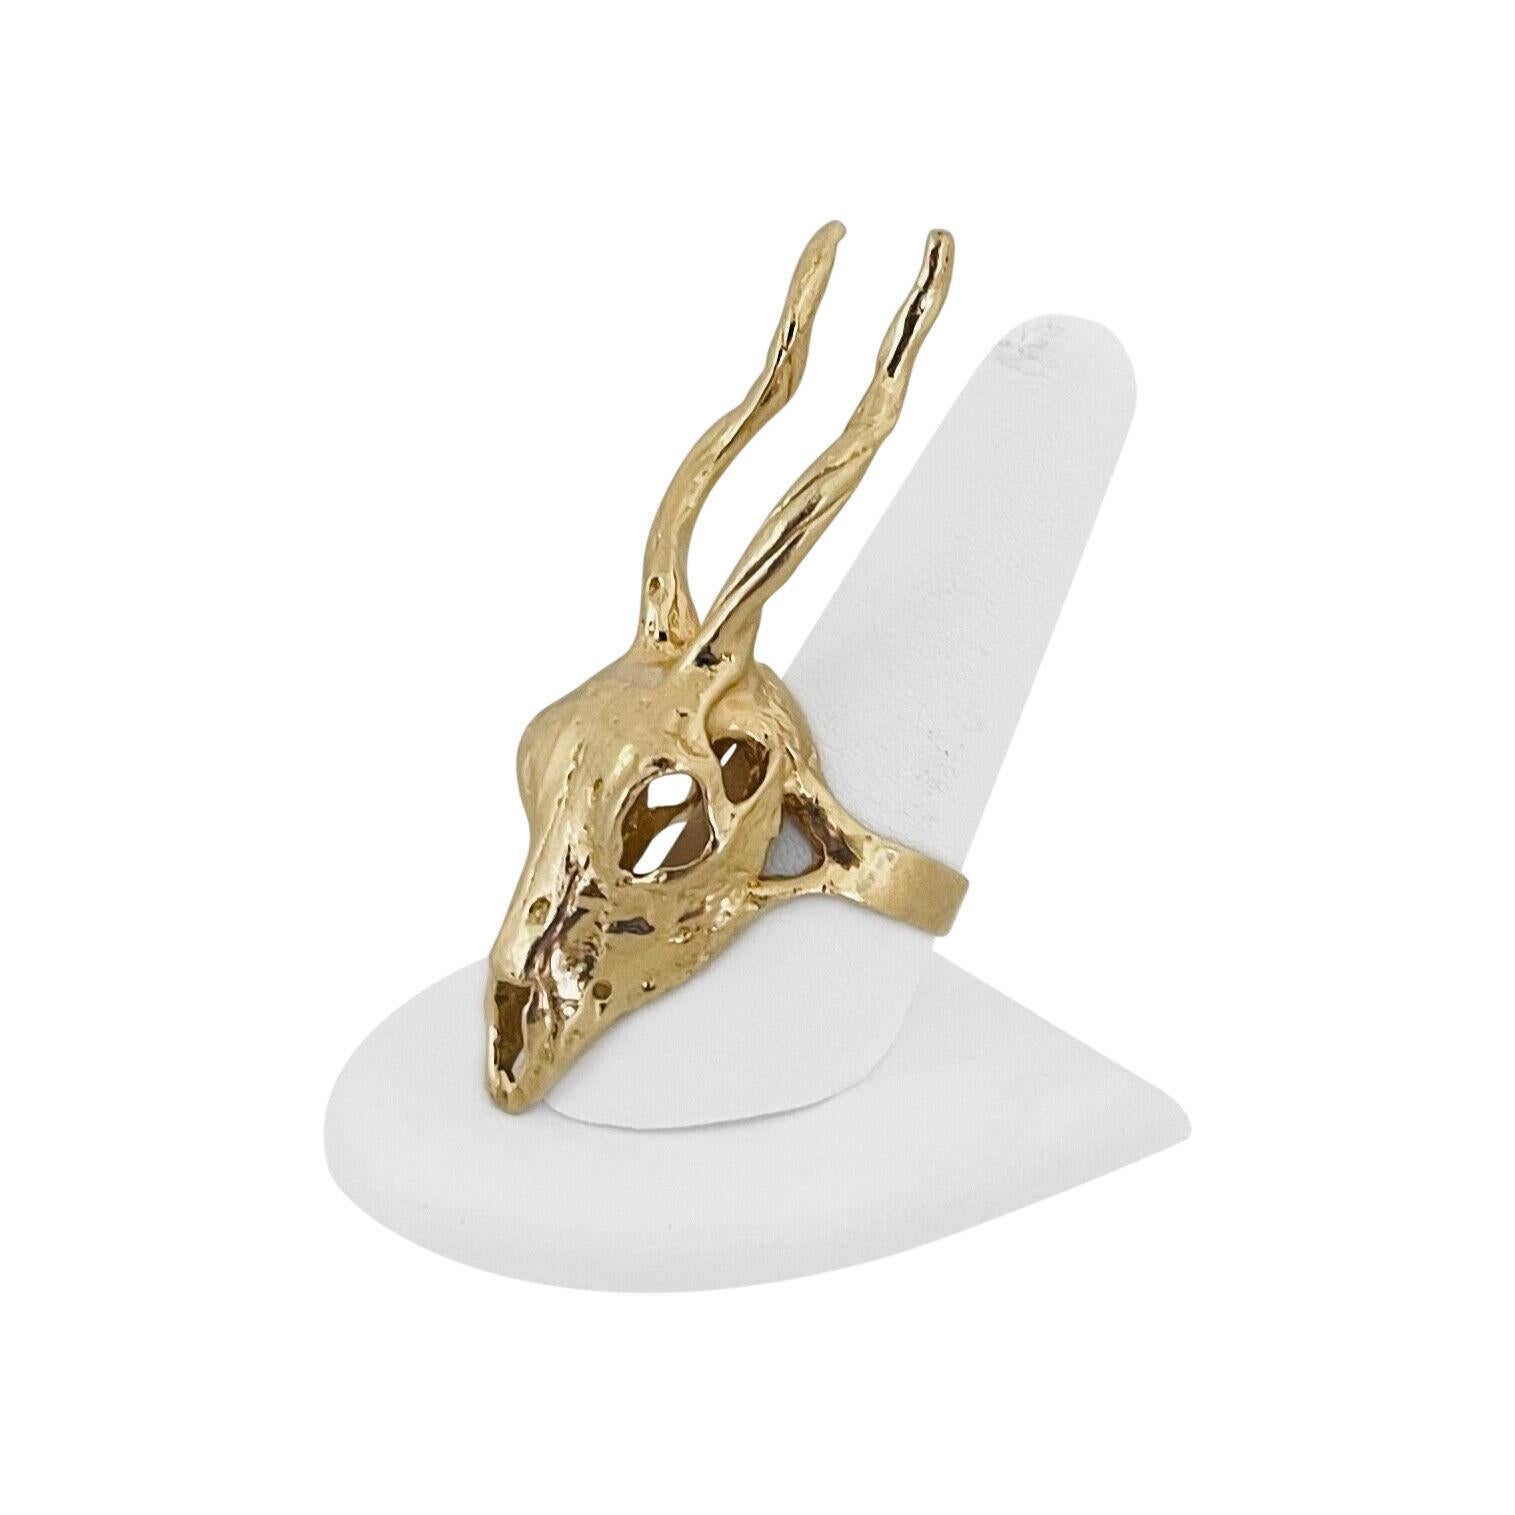 14k Yellow Gold 27g Solid Heavy Oversize Deer Antelope Horned Skull Ring Size 9

Condition:  Excellent Condition, Professionally Cleaned and Polished
Metal:  14k Gold (Marked, and Professionally Tested)
Weight:  27.1g
Face Measurements:  2.6